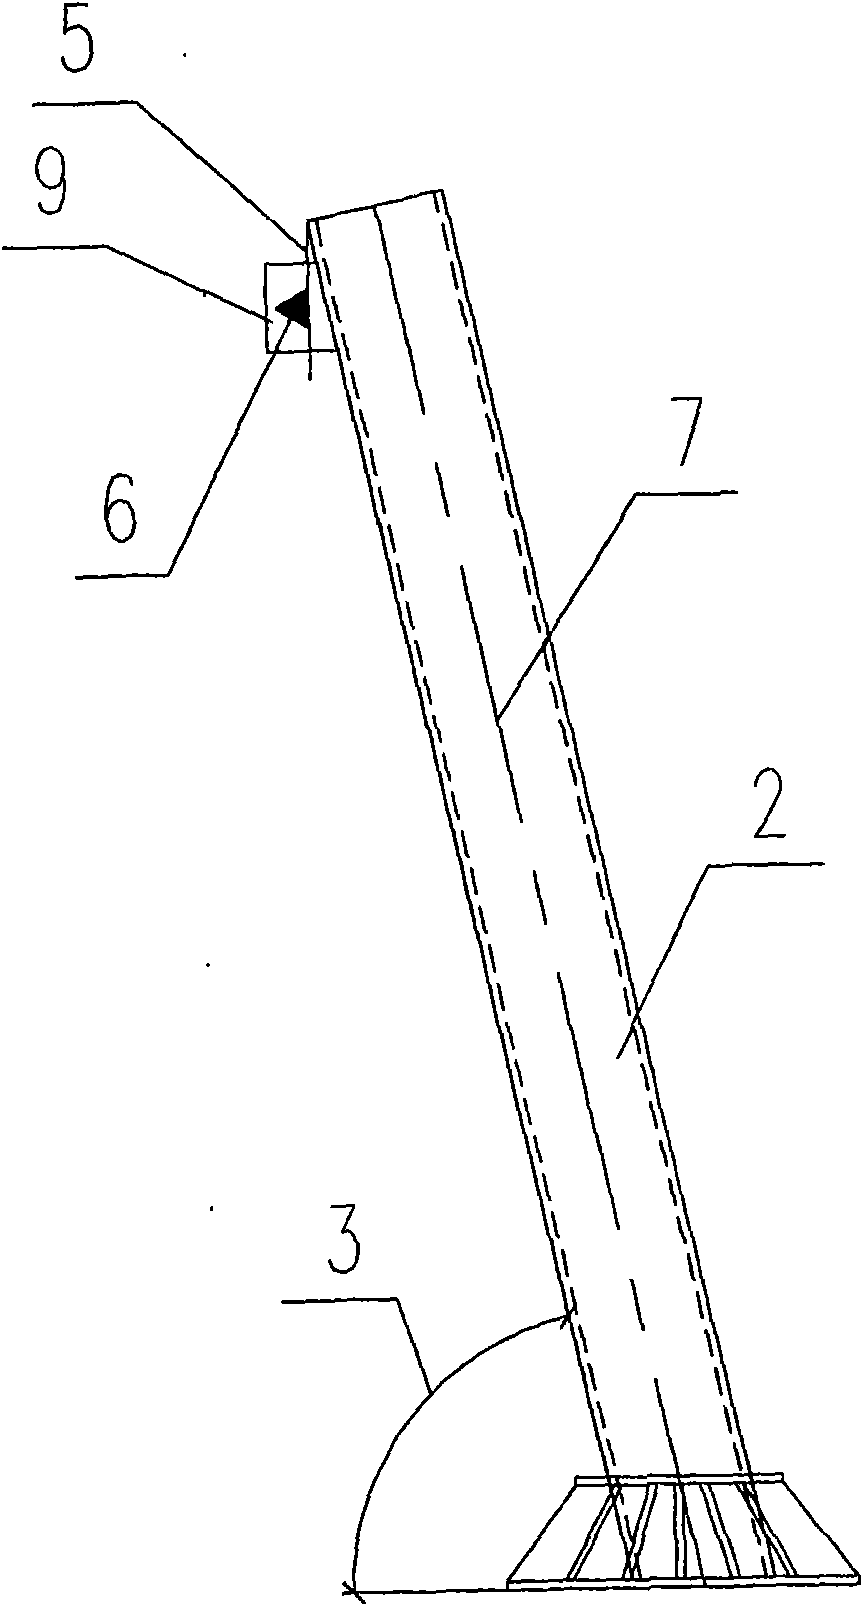 Method for measuring mounting inclination angle of one-side-inclined structure